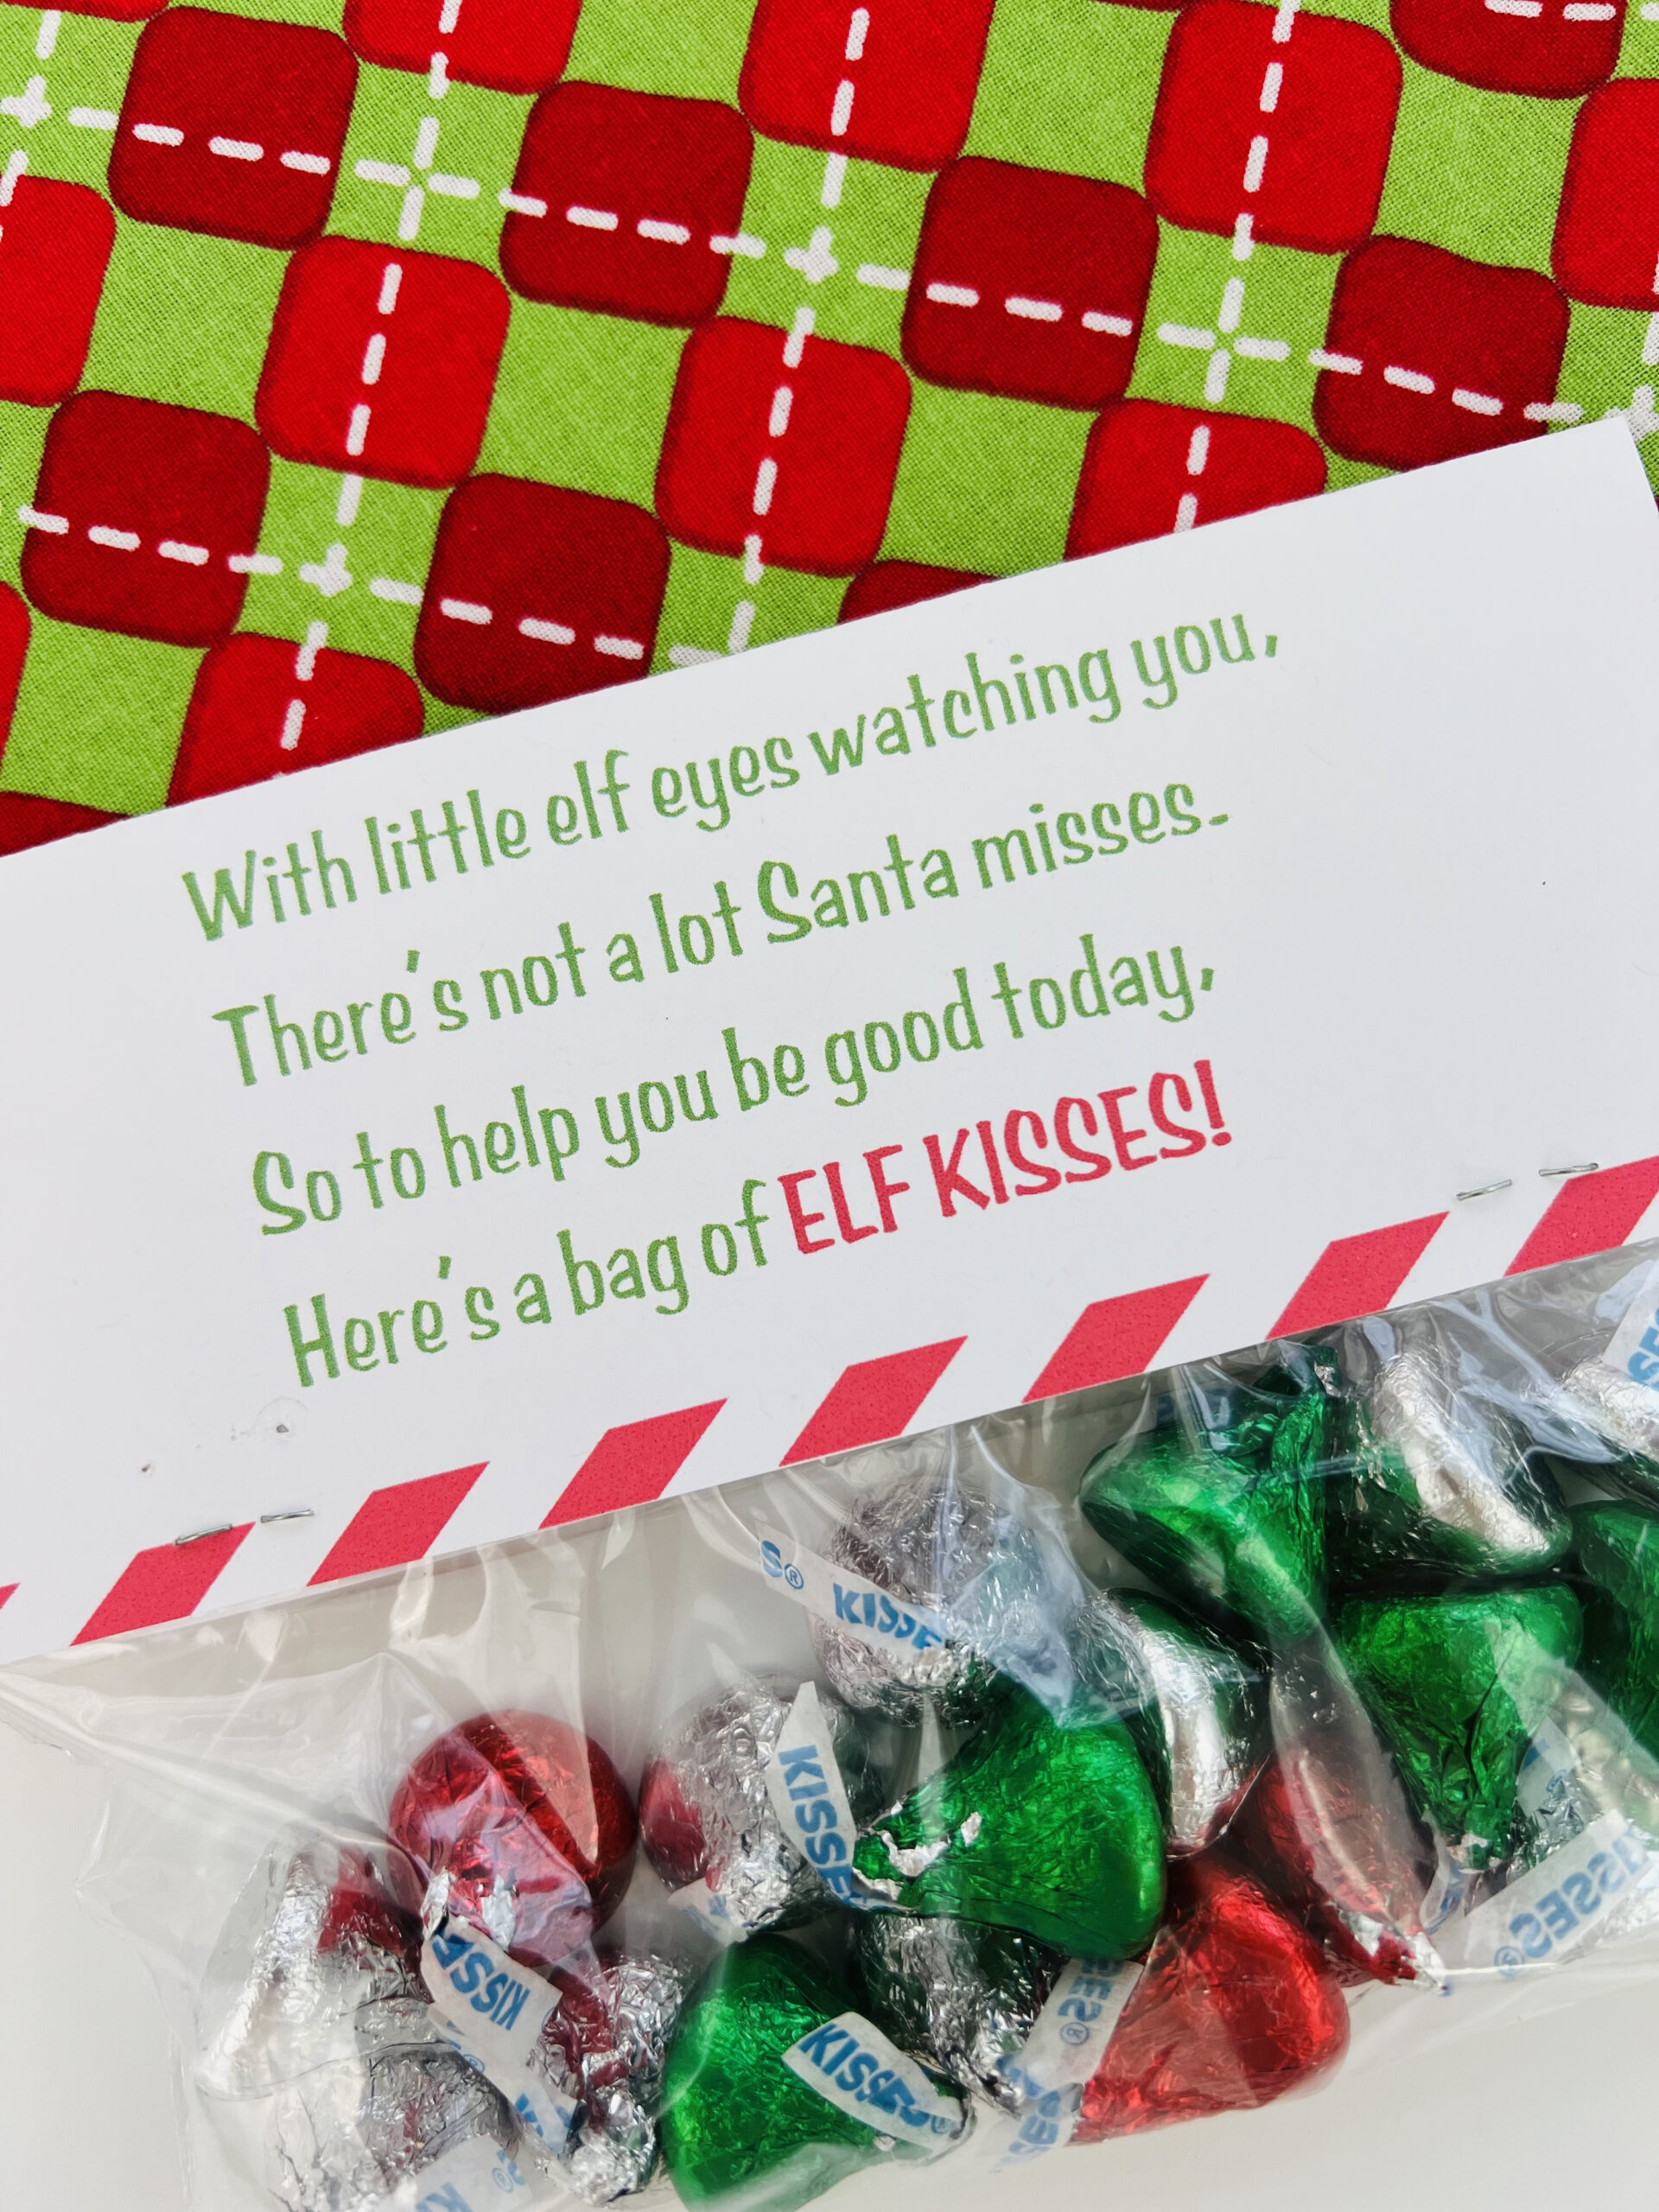 The Elf Poem is featured on the back side of the Elf Kisses treat bag topper printable.